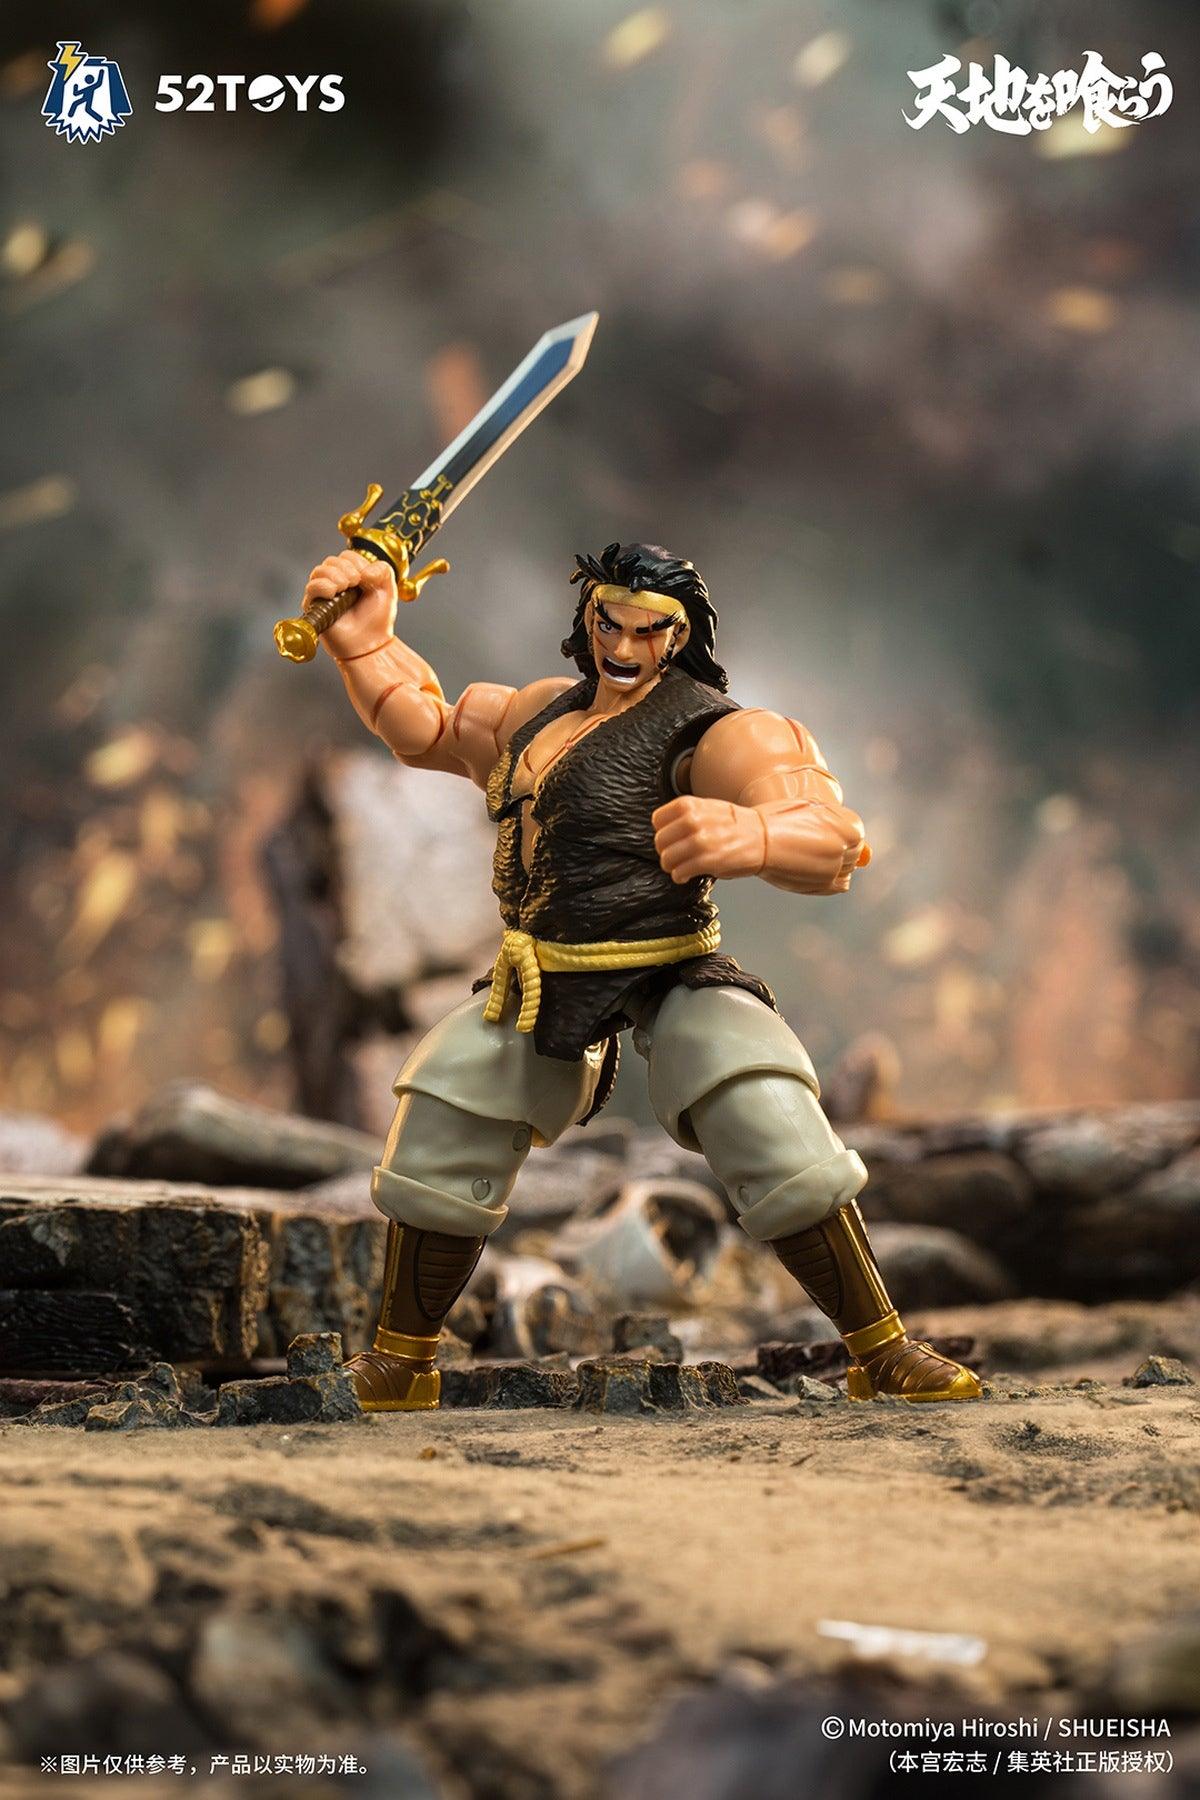 52Toys - 1:18 Zhang Fei (Dynasty Wars) Action Figure